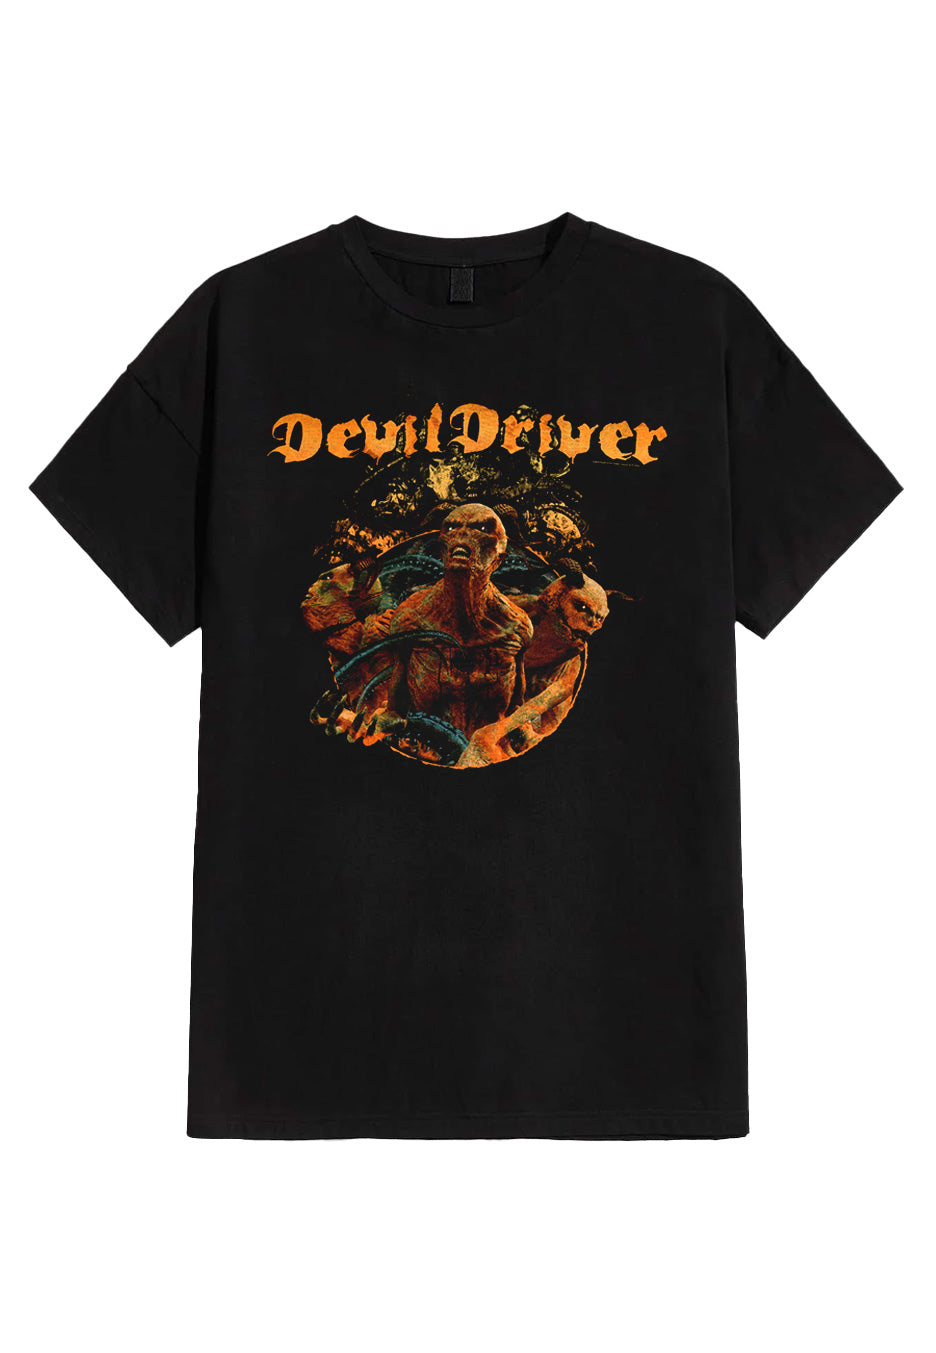 Devildriver - Keep Away From Me - T-Shirt